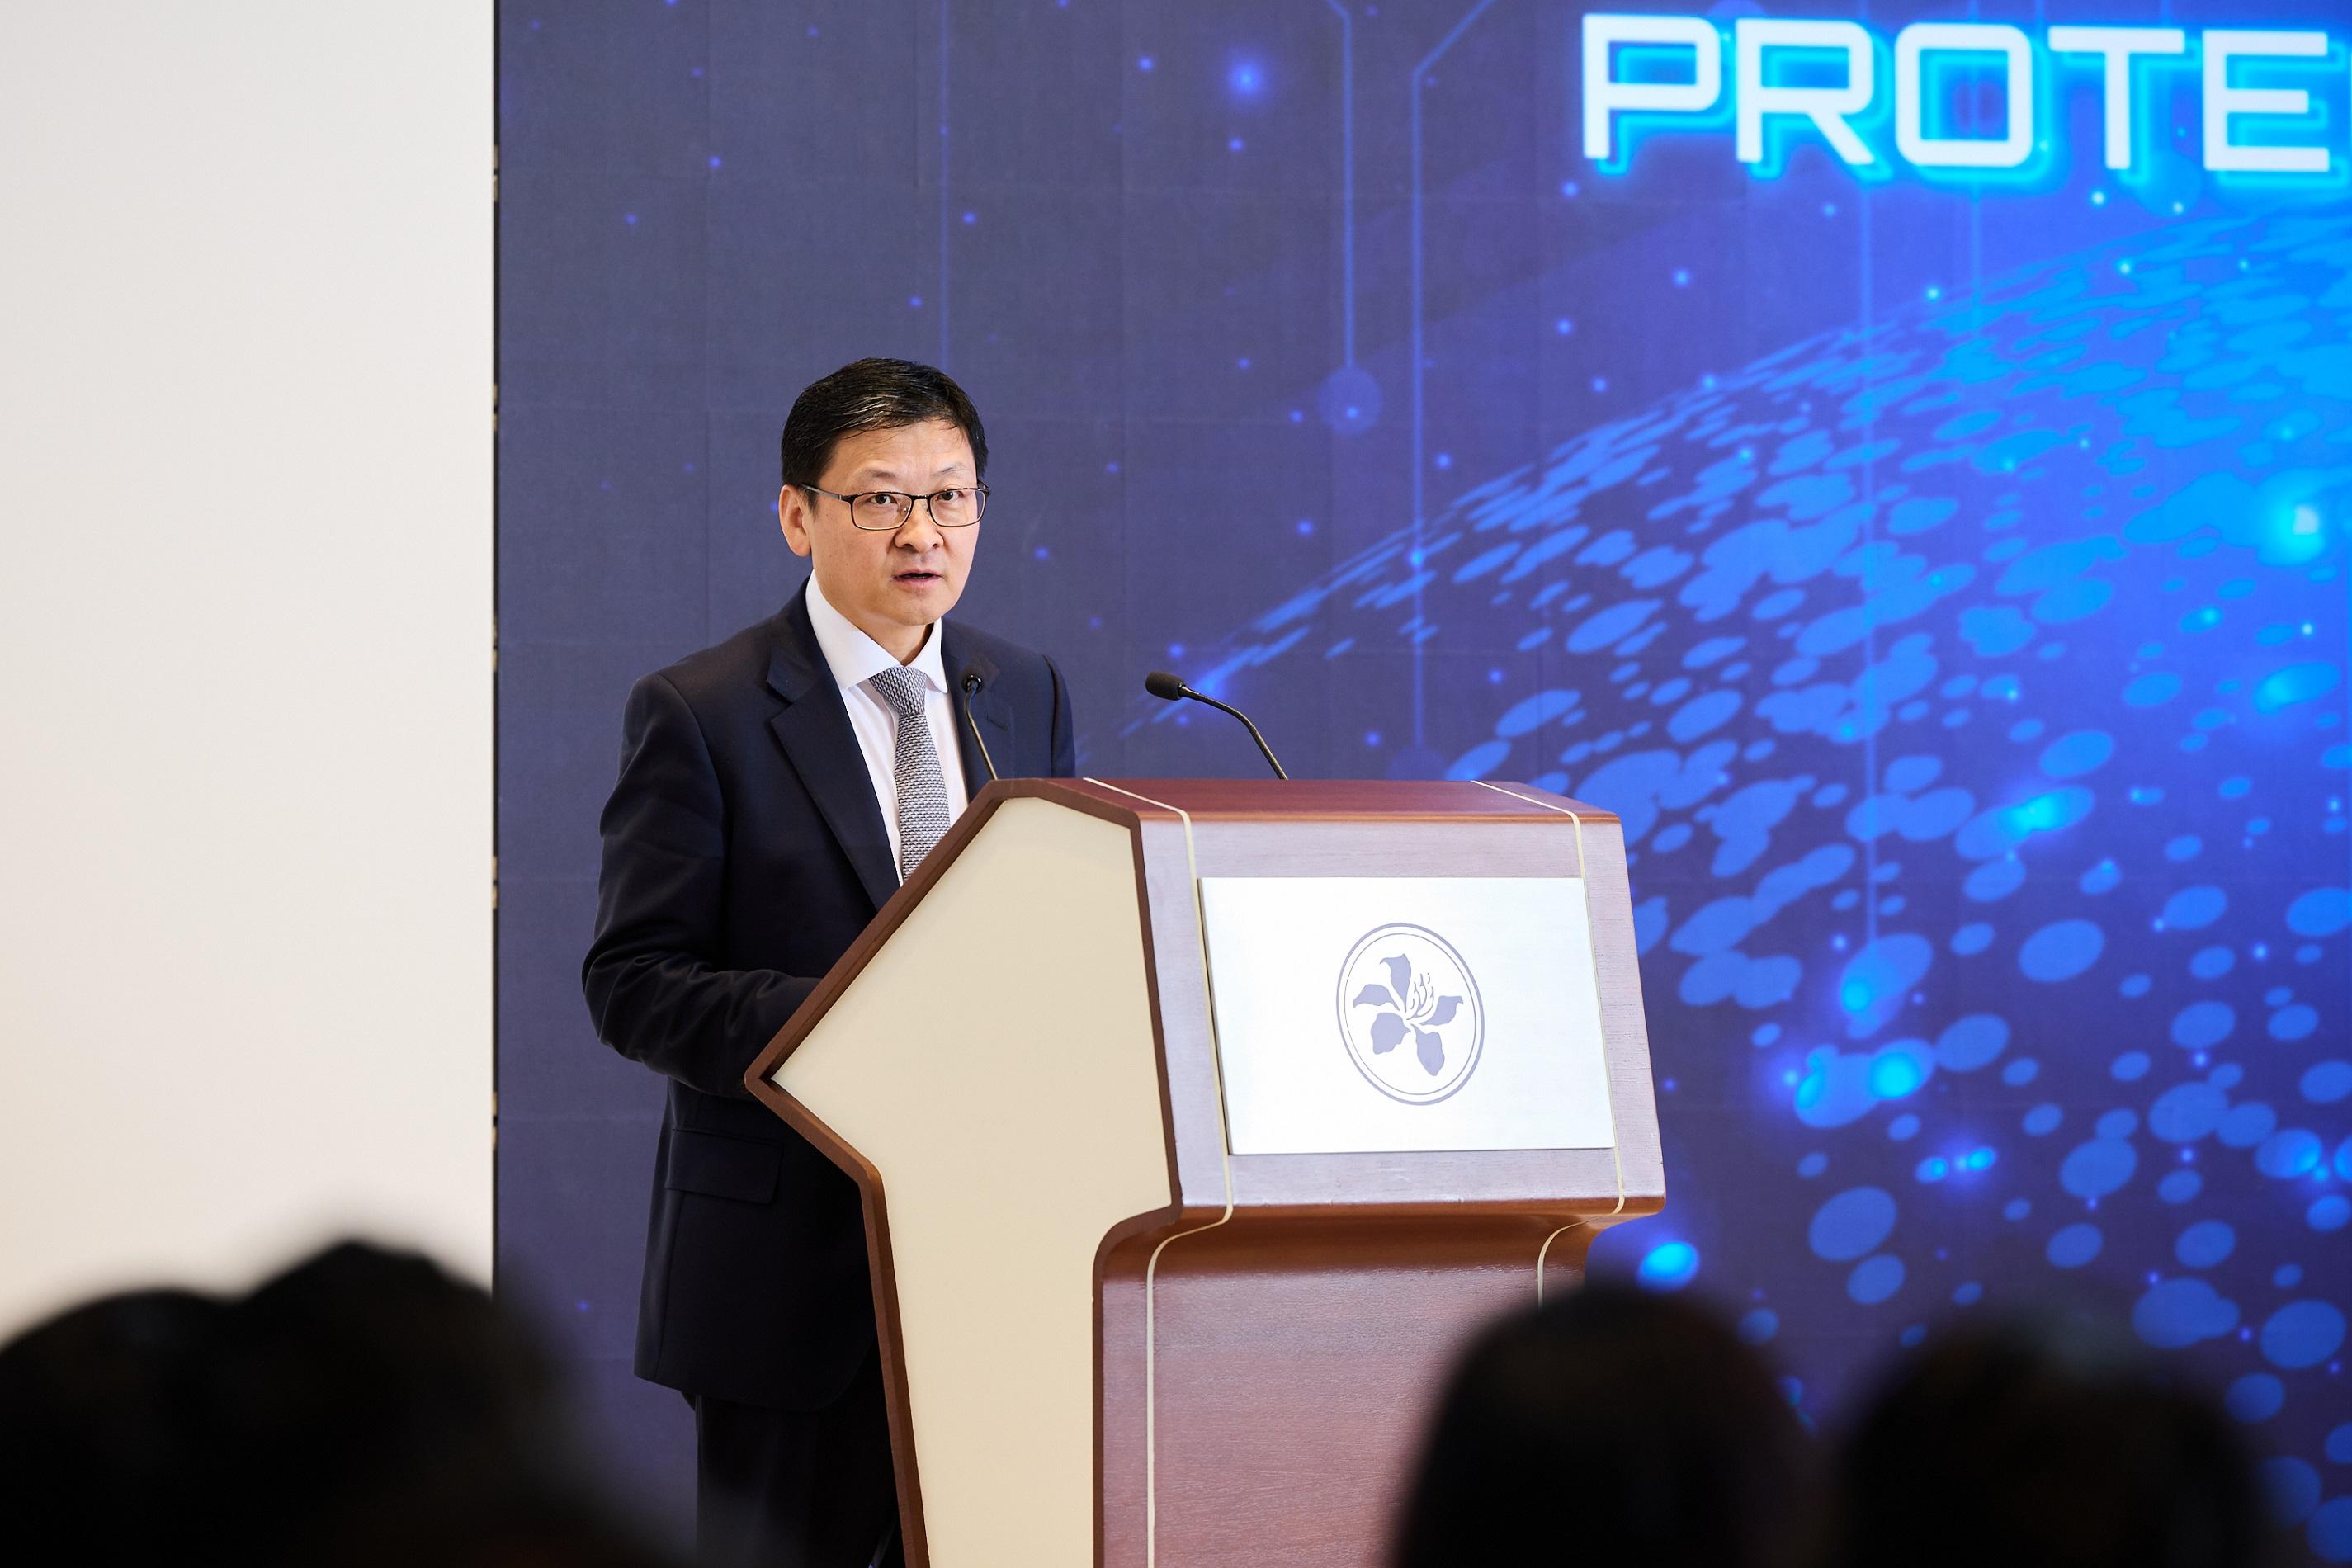 The Chairman of the Hong Kong Association of Banks and Vice Chairman and the Chief Executive of Bank of China (Hong Kong), Mr Sun Yu, today (June 29) delivers a speech at the Anti-Scam Consumer Protection Charter event, sharing the measures taken by the banking industry to enhance credit card customer protection.